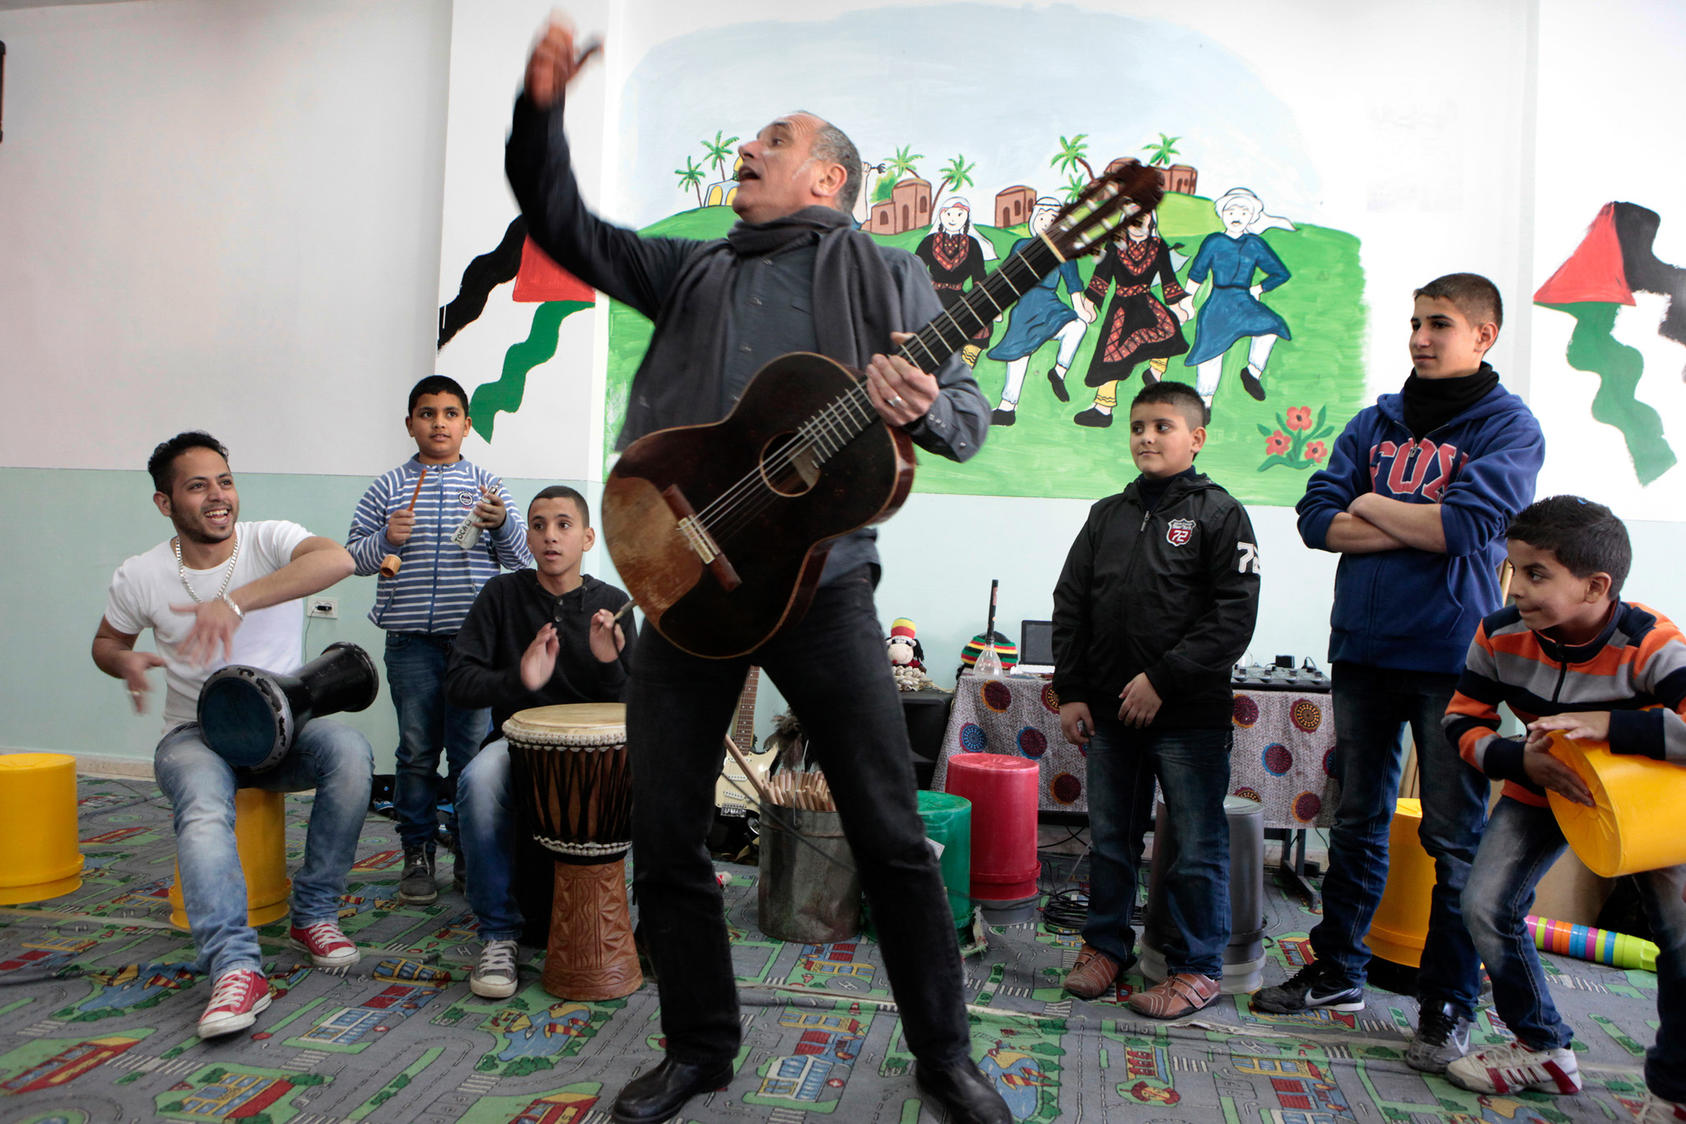 David Broza, an Israeli singer-songwriter, leads a workshop with Palestinian boys in the Shuafat neighborhood of East Jerusalem, Jan. 3, 2014. Broza visits here regularly as part of a personal effort to bridge the Israeli-Palestinian divide. Of his outlook on the peace process, Broza has said “There has to be a generation that will plant the seeds, and there will be those that will sit in the shade, and those that will eat the fruit.”